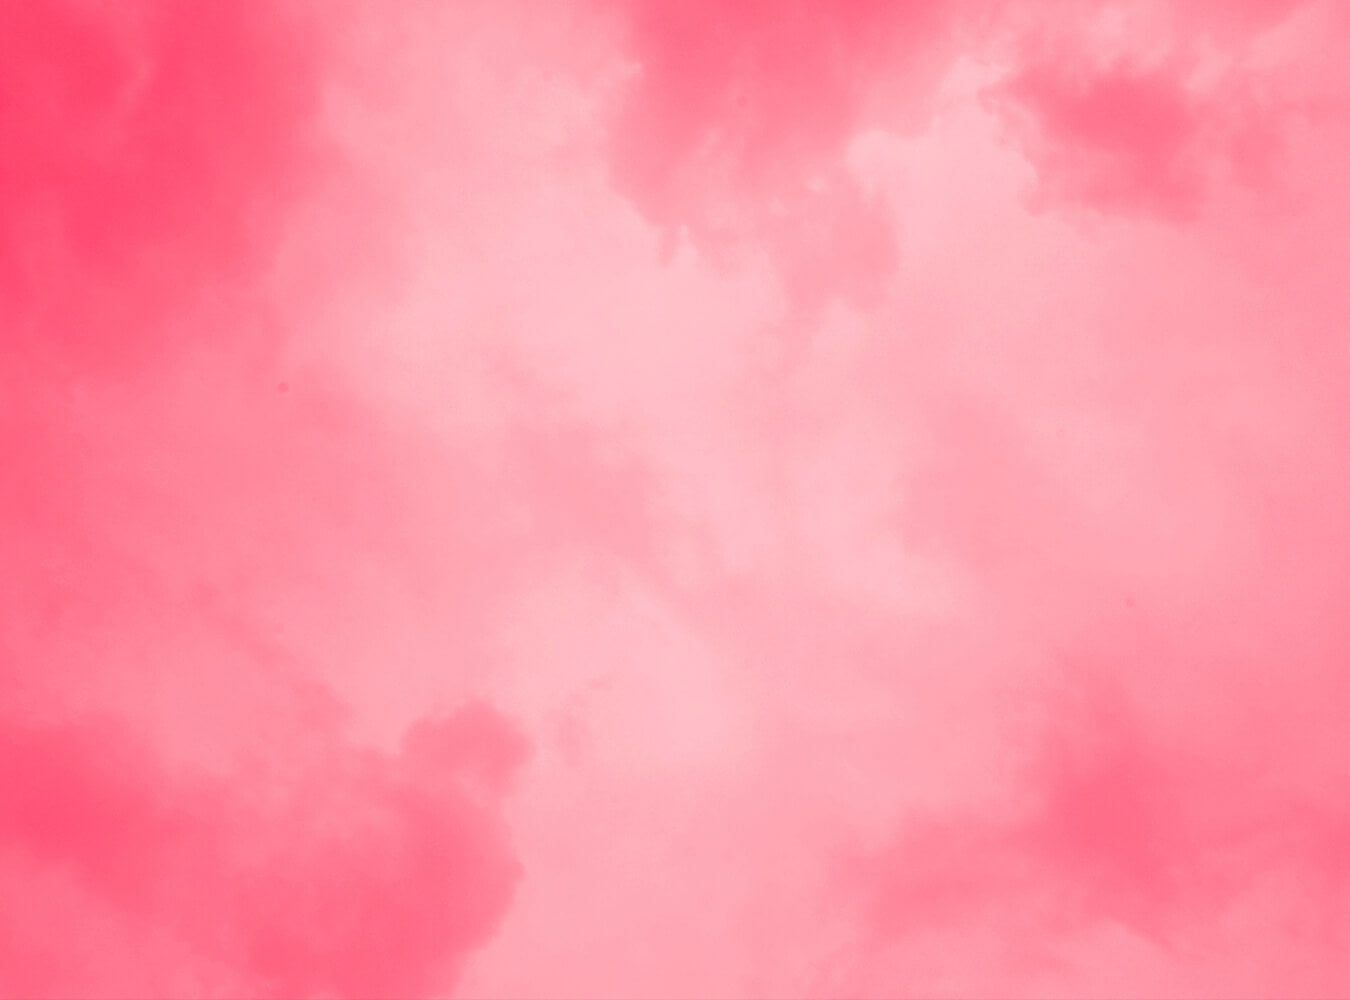 Pink Fog Texture Backdrop For Photography IBD-24446